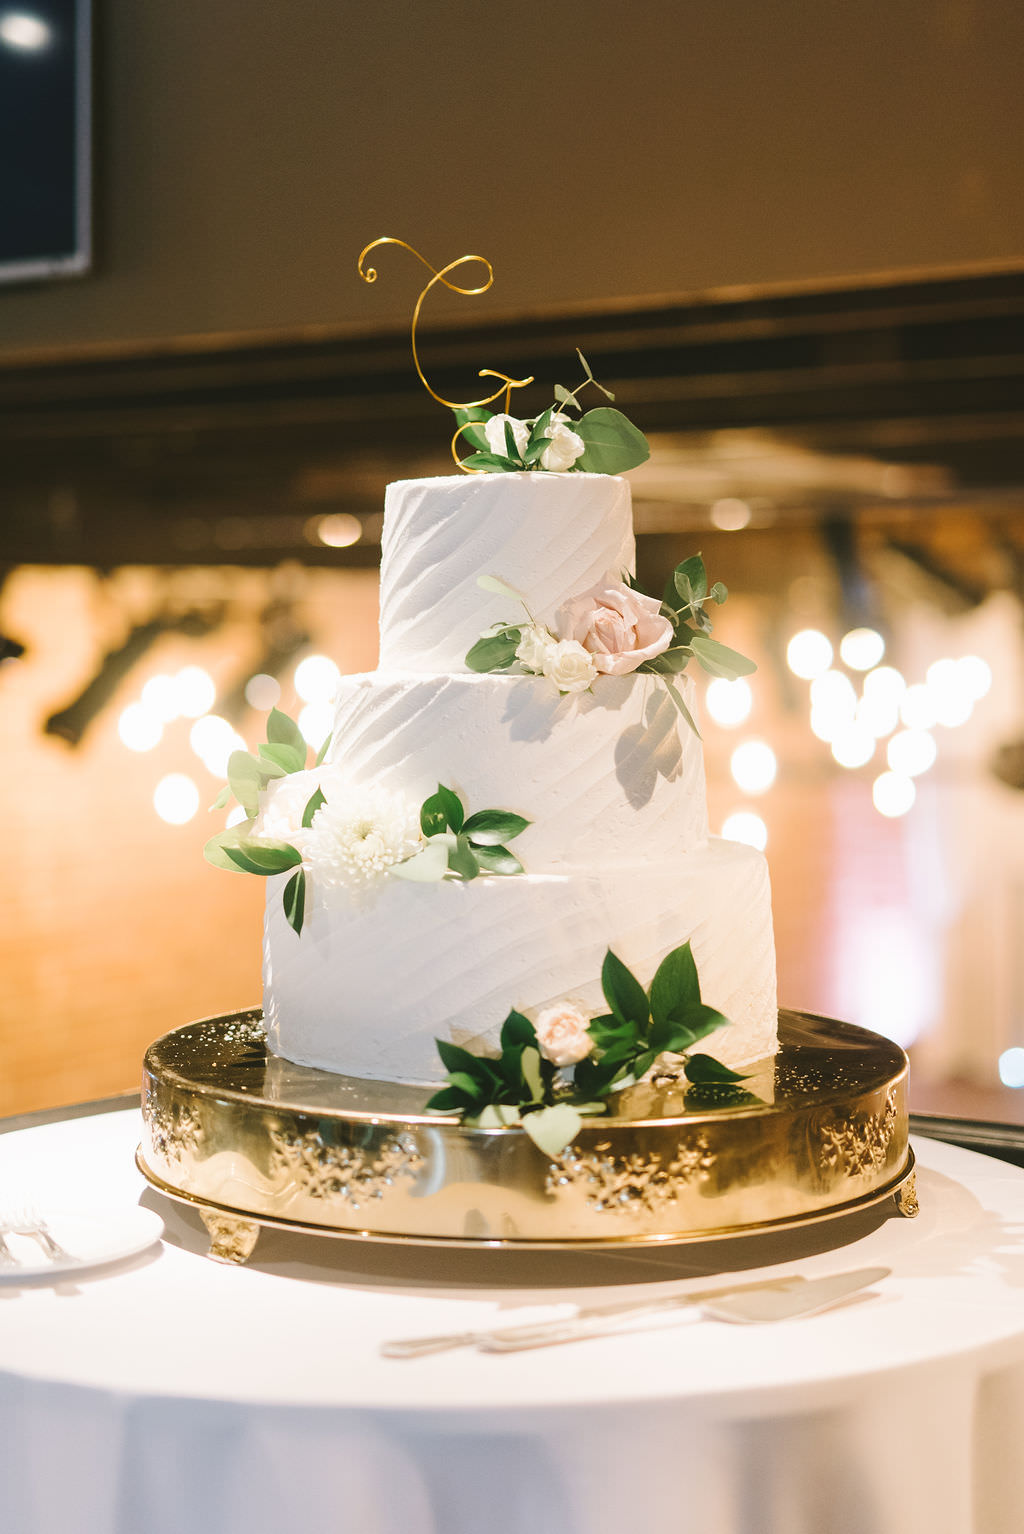 Modern, Elegant Three Tier Classic White Wedding Cake, Blush Pink, Ivory and Greenery Real Floral Accents with Custom Cake Topper | Tampa Bay Wedding Caterer and Baker Olympia Catering | Florida Photographer Kera Photography